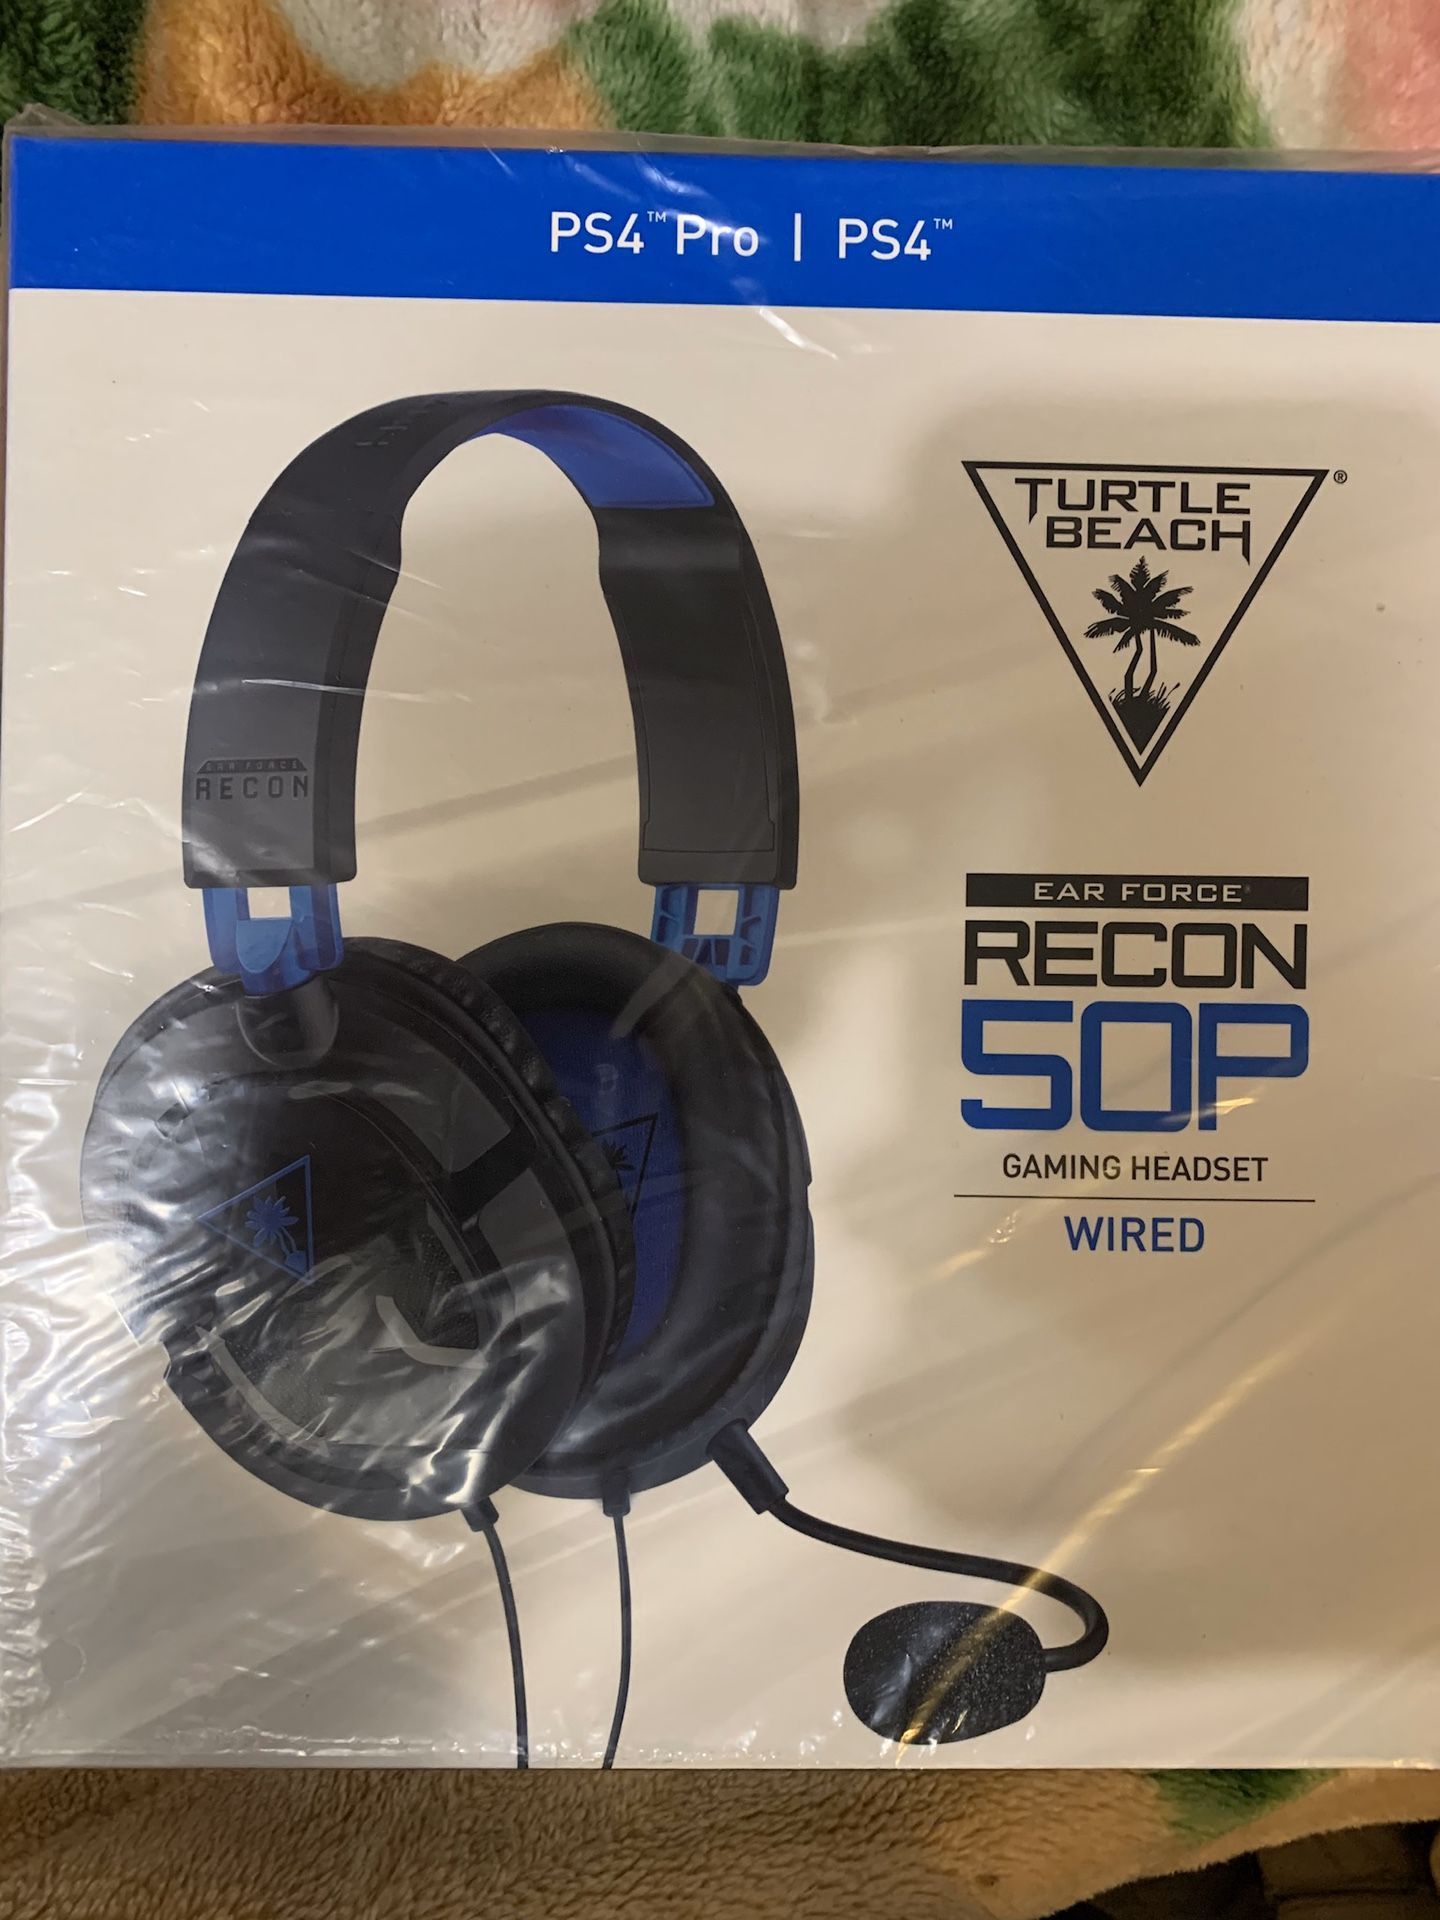 Pro Headset - Turtle Beach works for both PS4 & Xbox